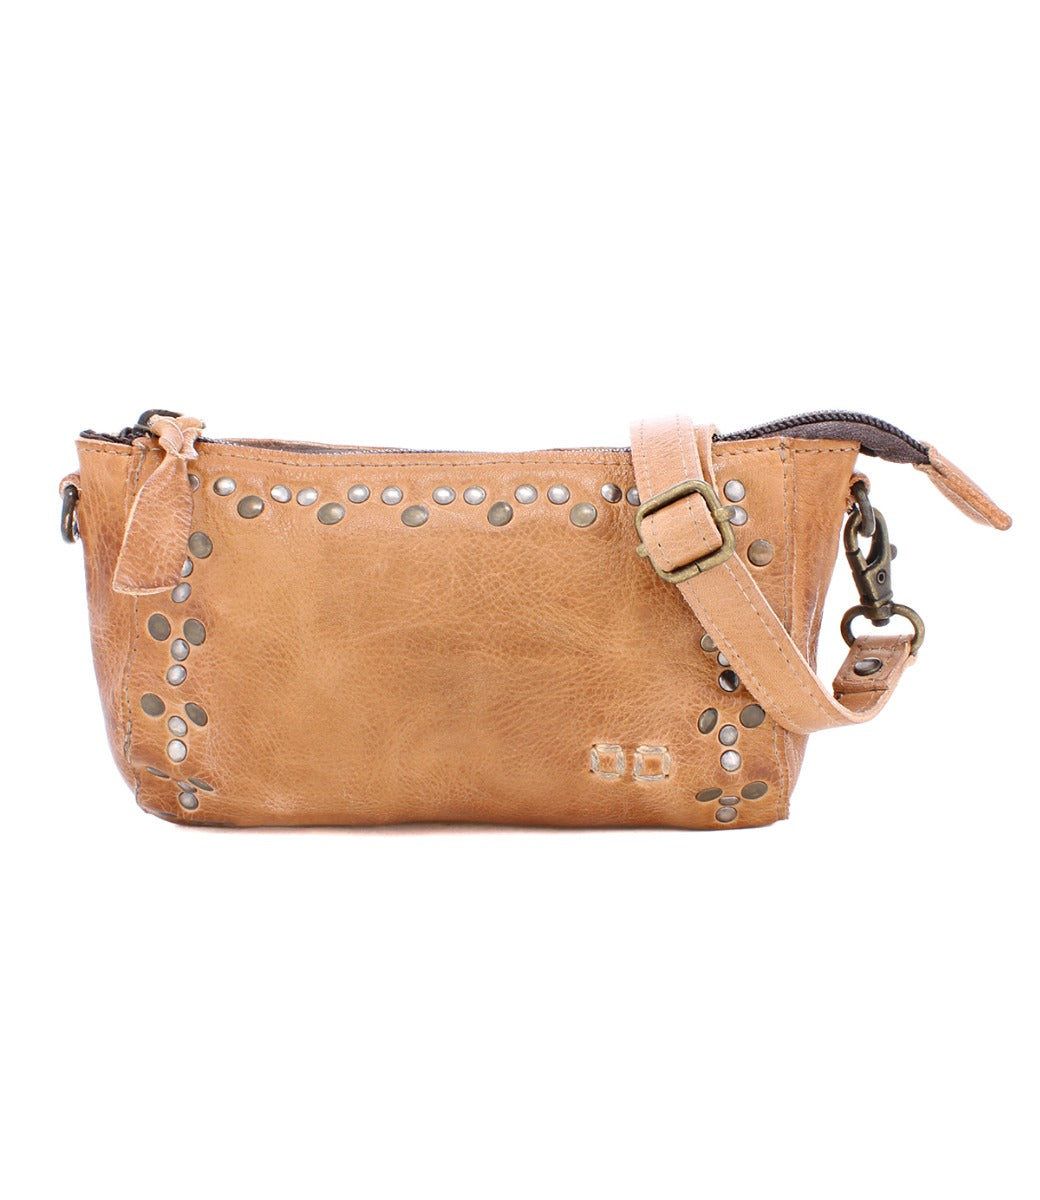 An Encase tan leather cross body bag with studded details from Bed Stu.